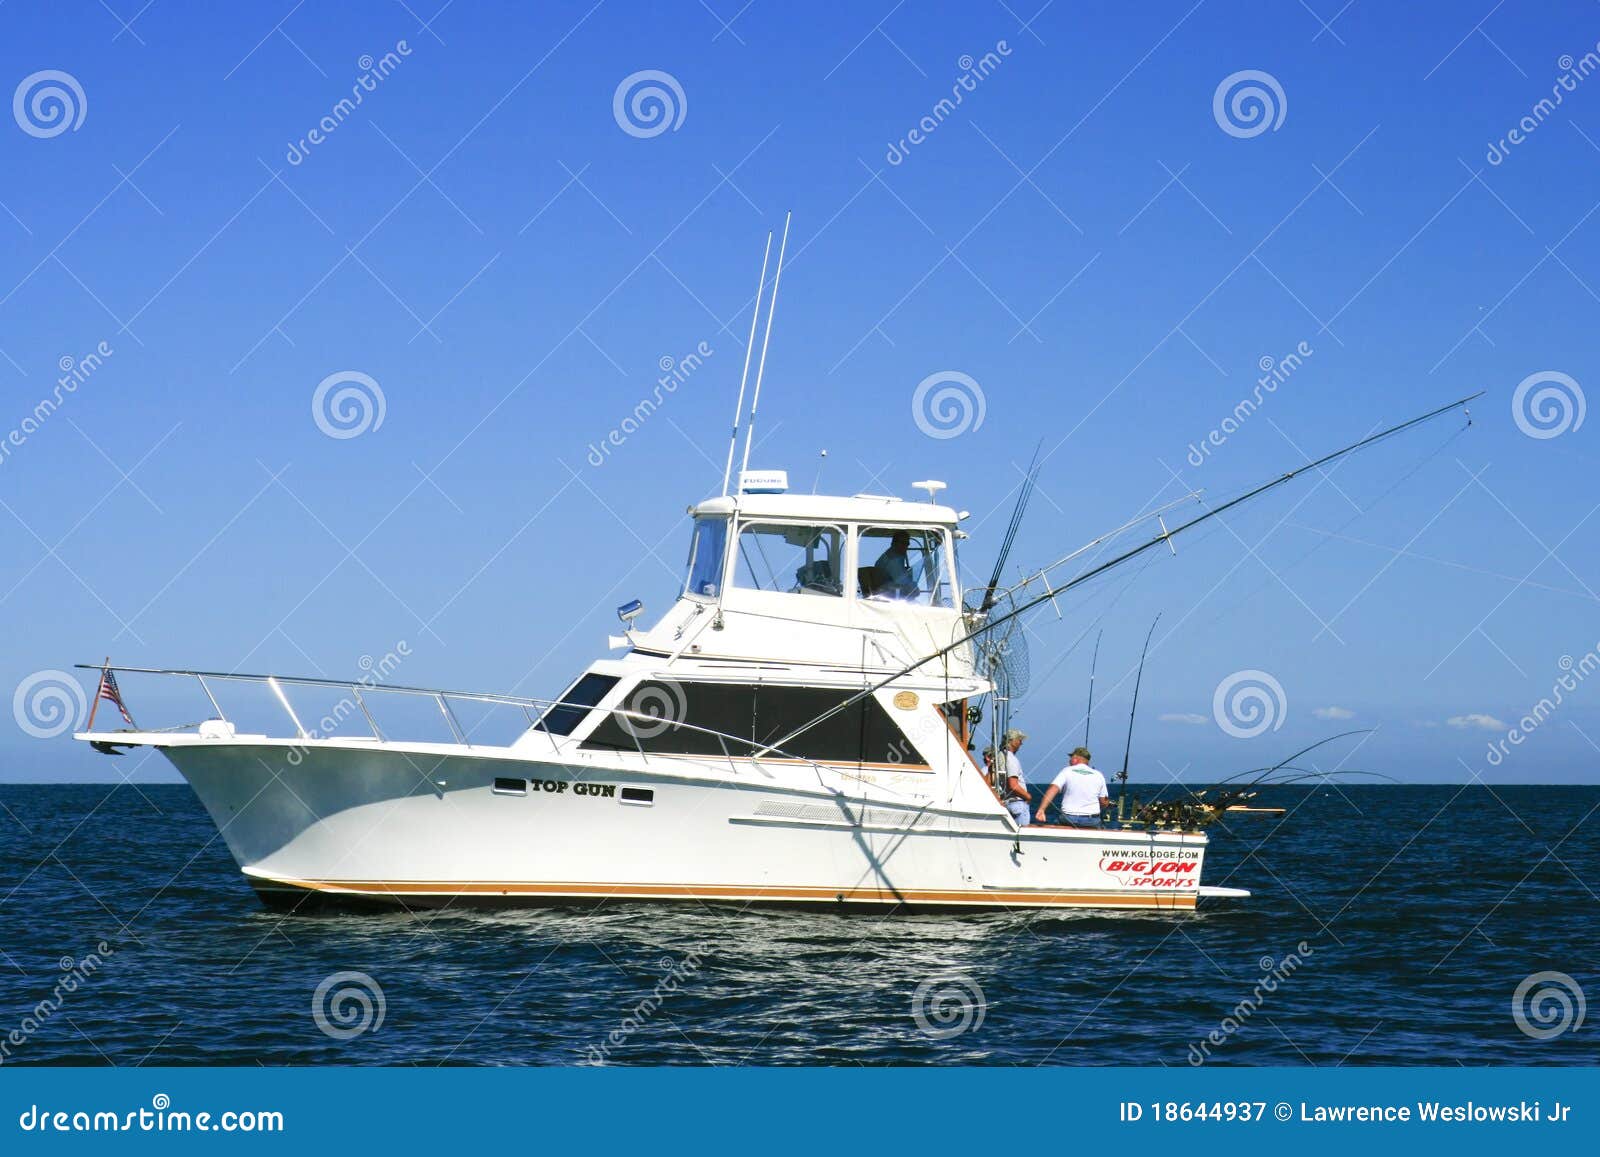 Fishermen on a charter fishing boat, Top Gun, looking for salmon and 